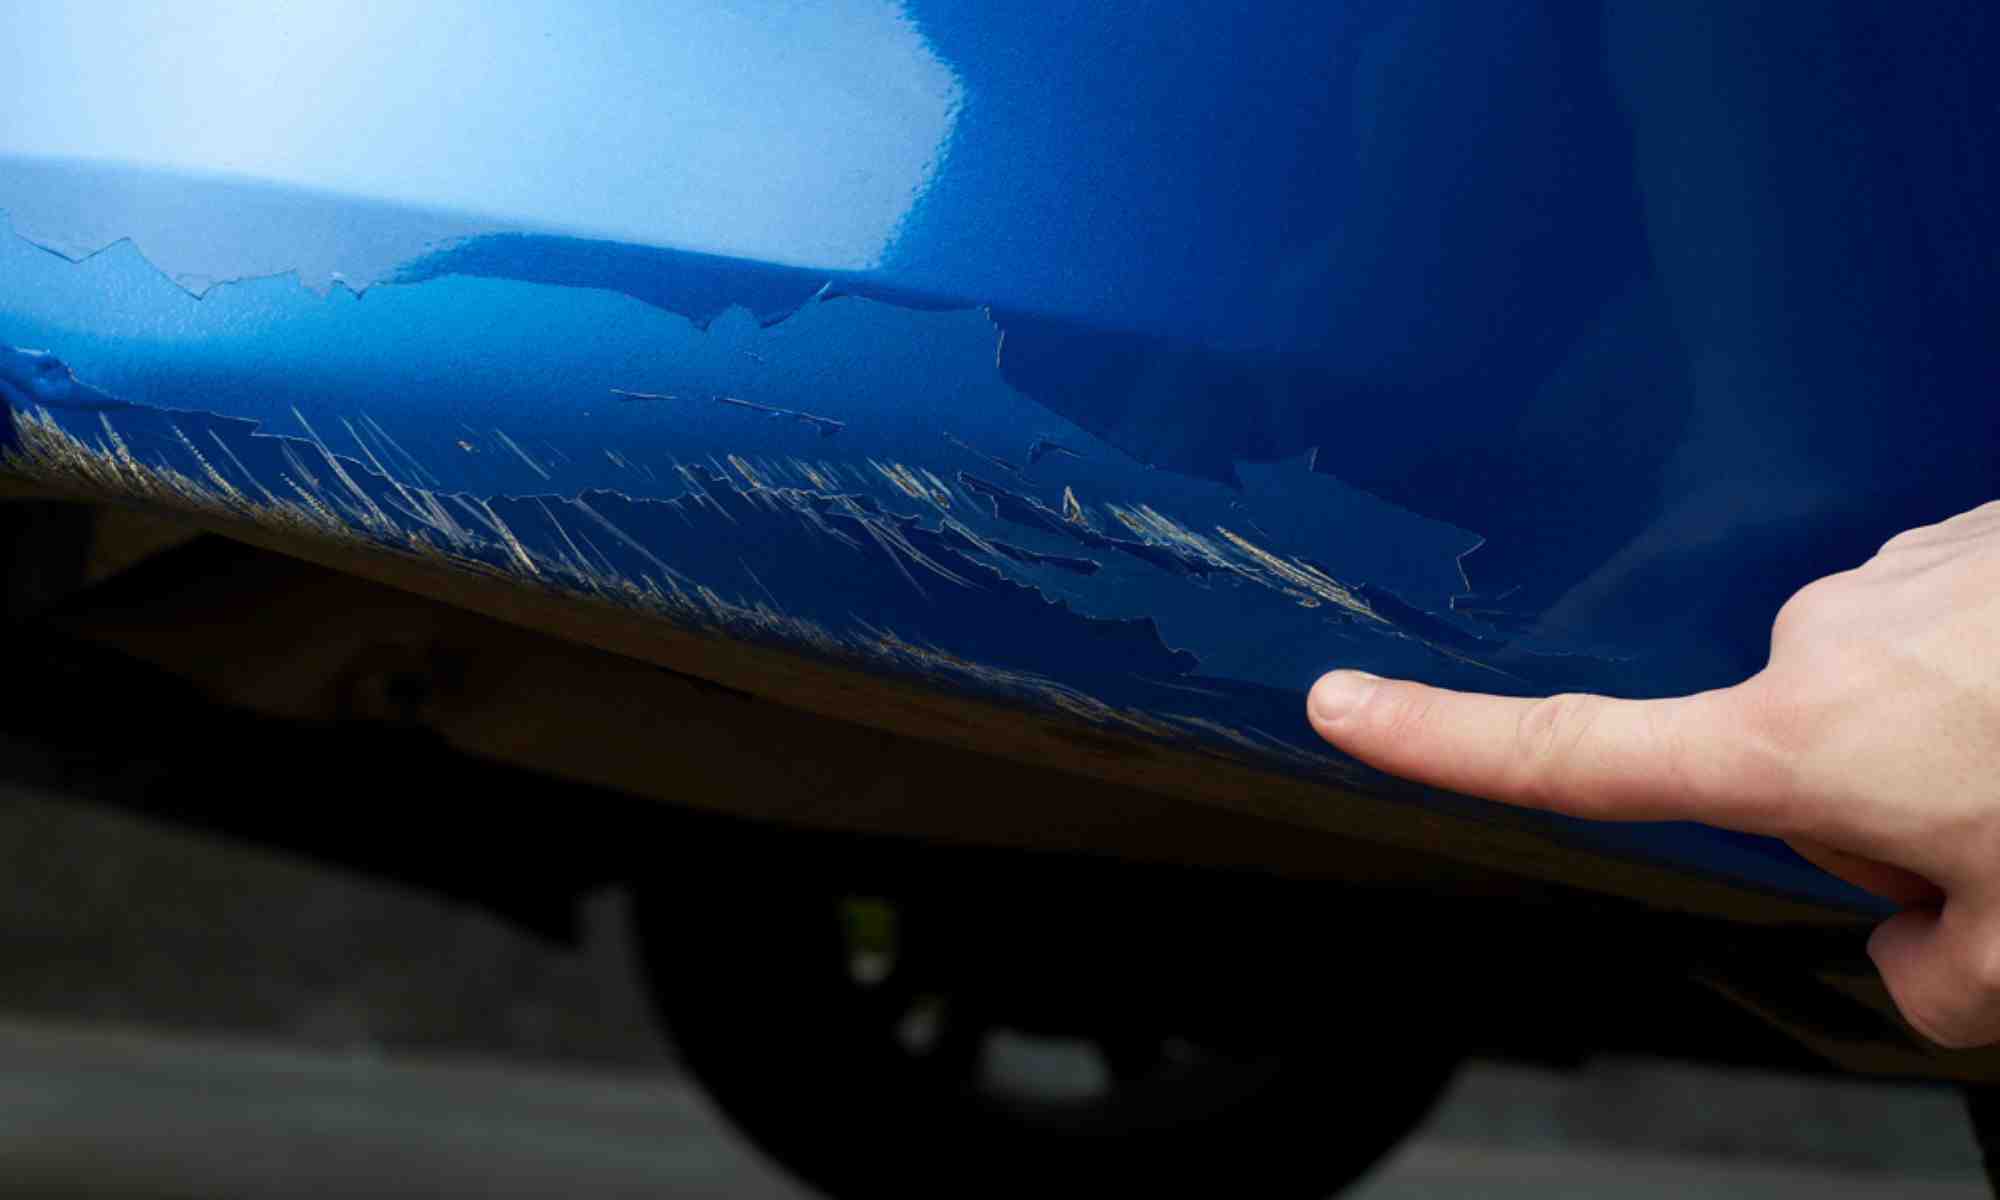 Will CarMax buy a car with a dent?